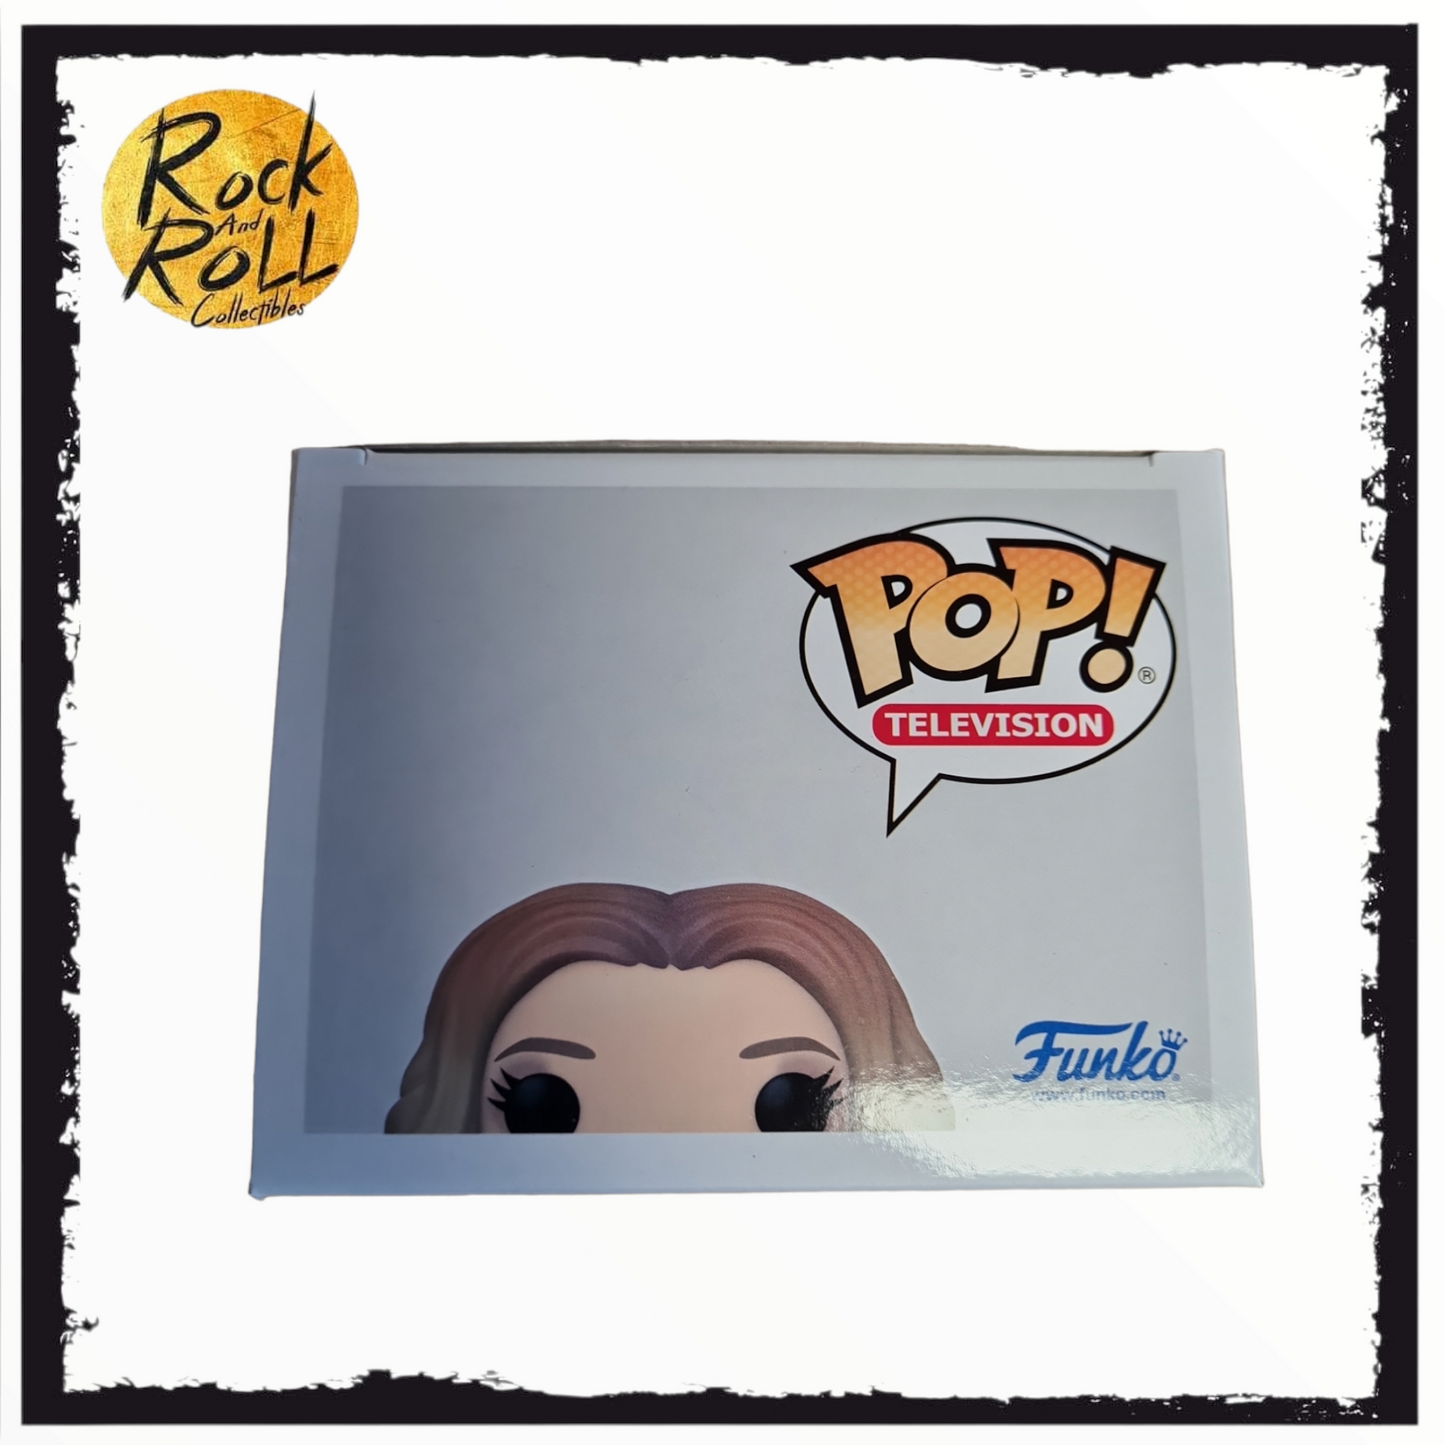 Schitts Creek - Alexis Rose Funko Pop! #1169 2021 Fall Convention Shared Exc.